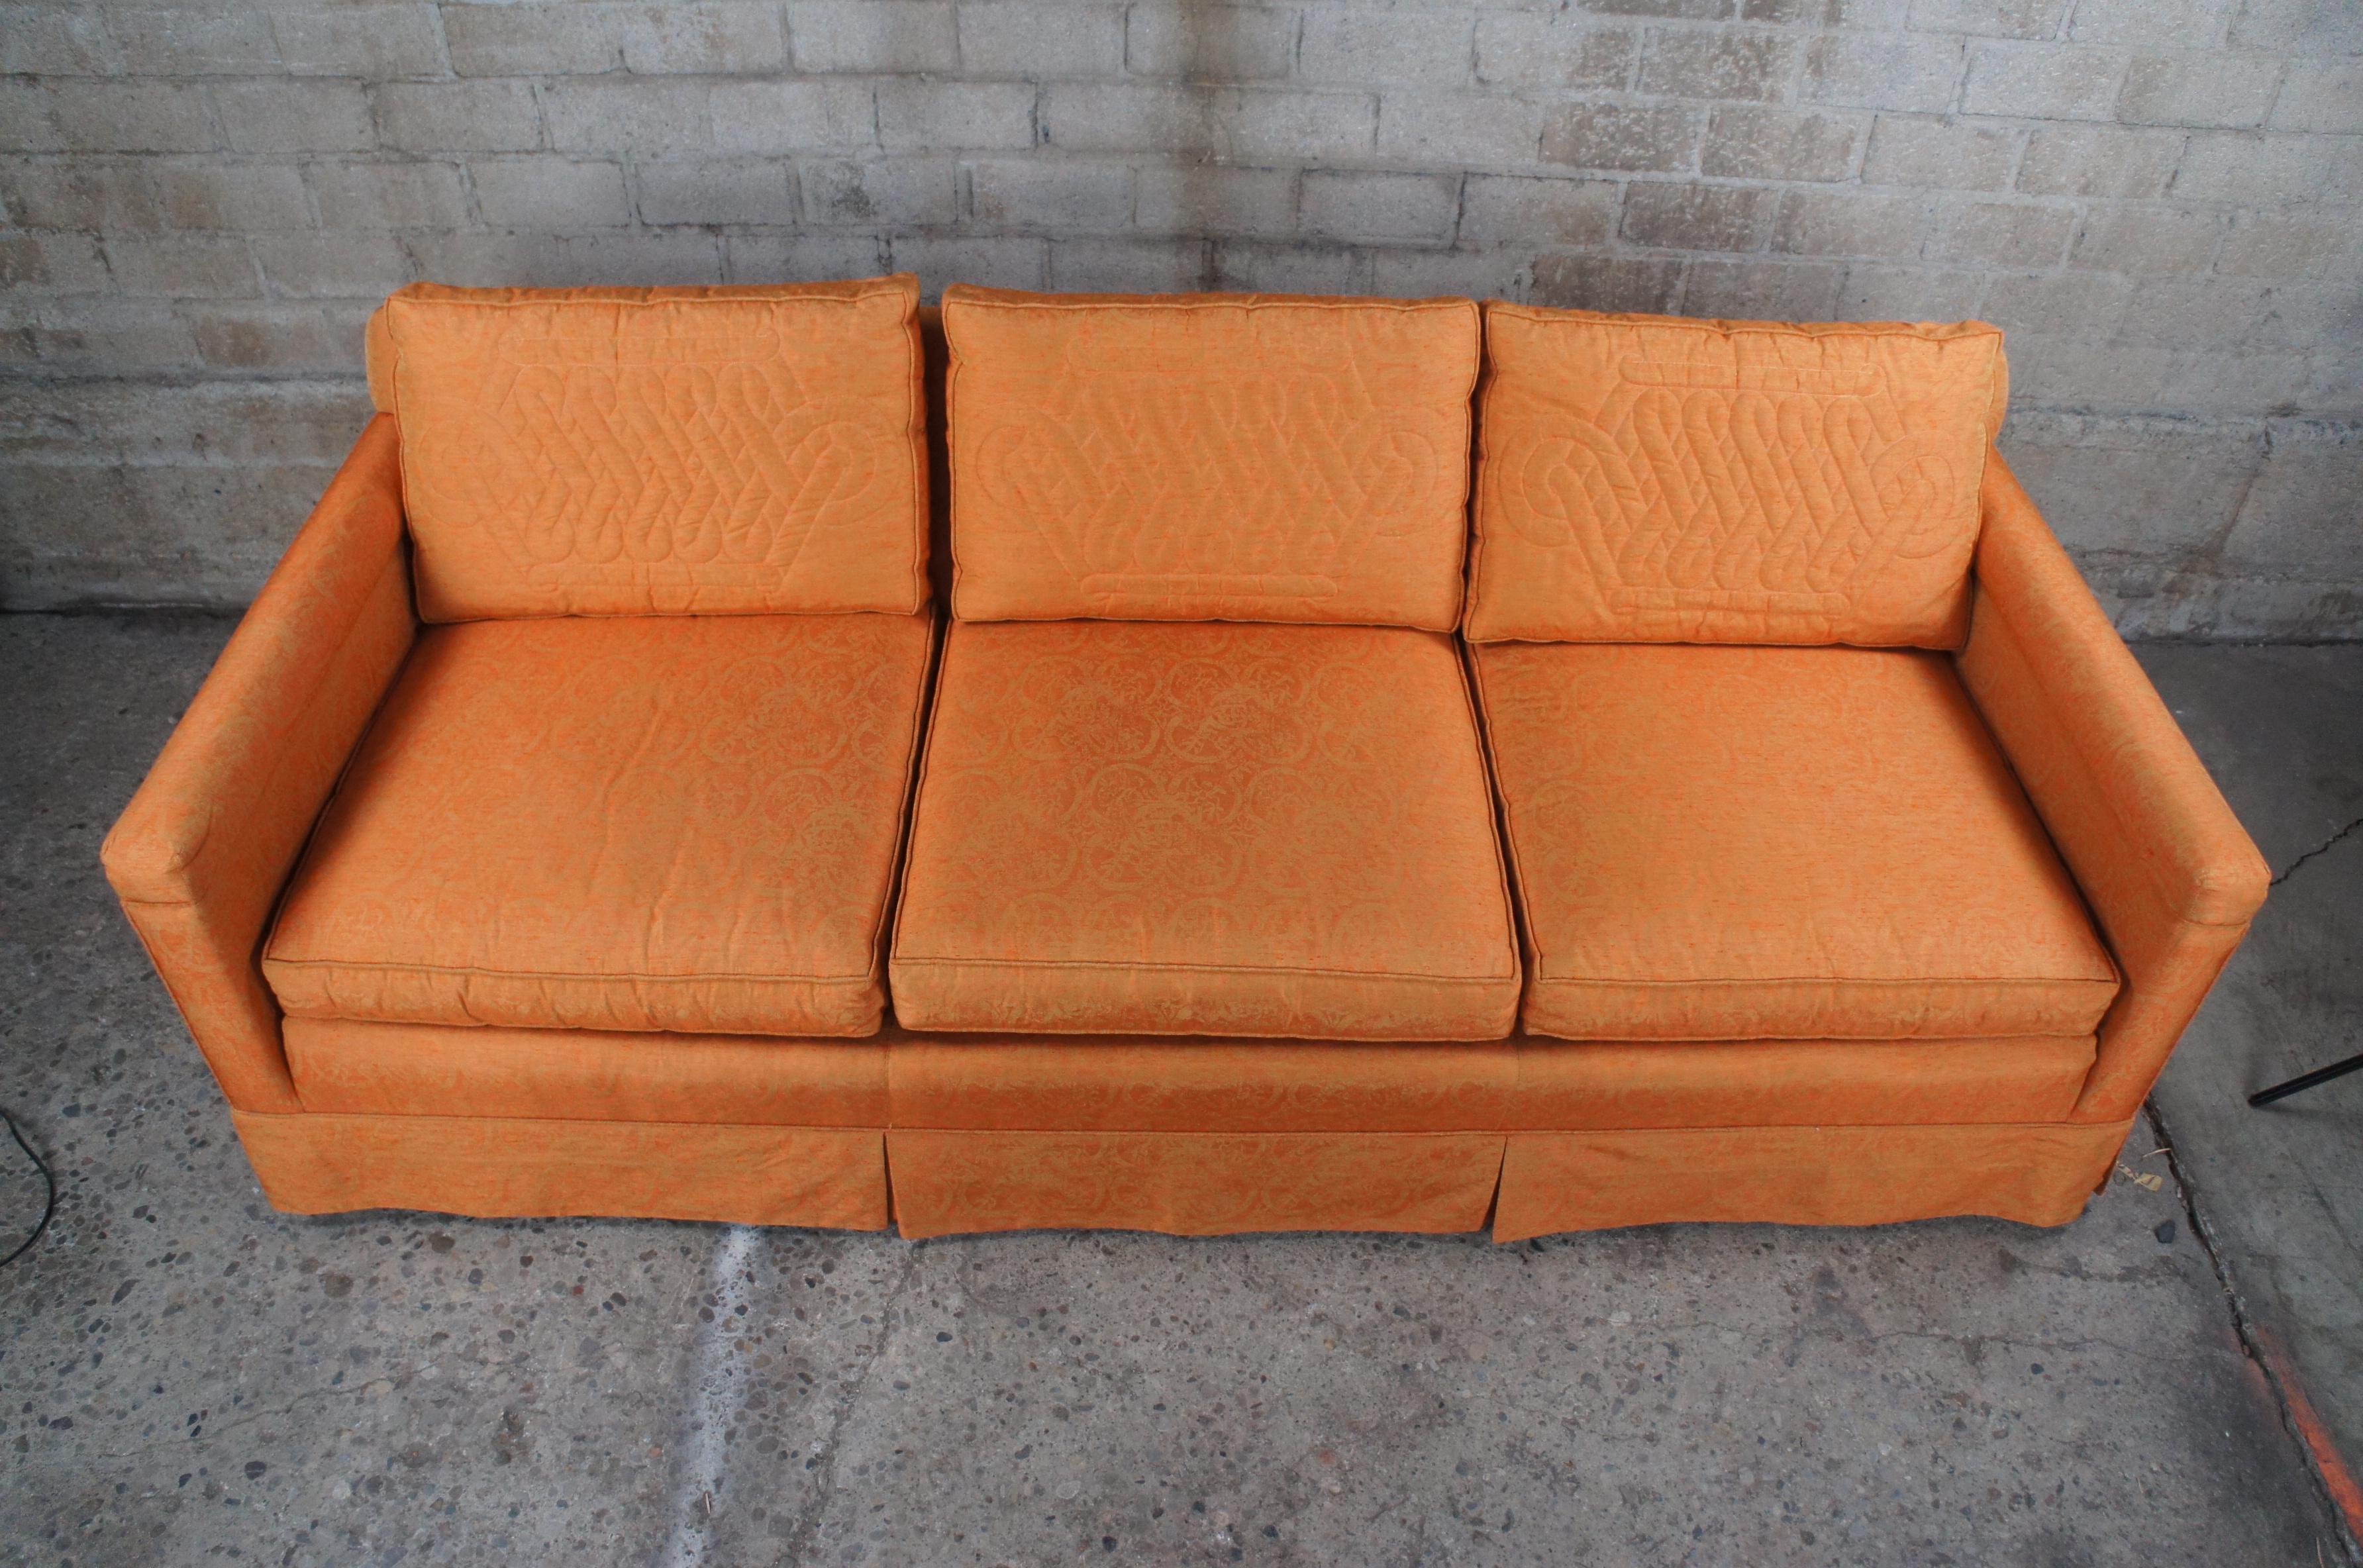 Globe Furniture Mid-Century Modern Orange Damask Mahogany Quilted 3 Seater Sofa In Good Condition For Sale In Dayton, OH